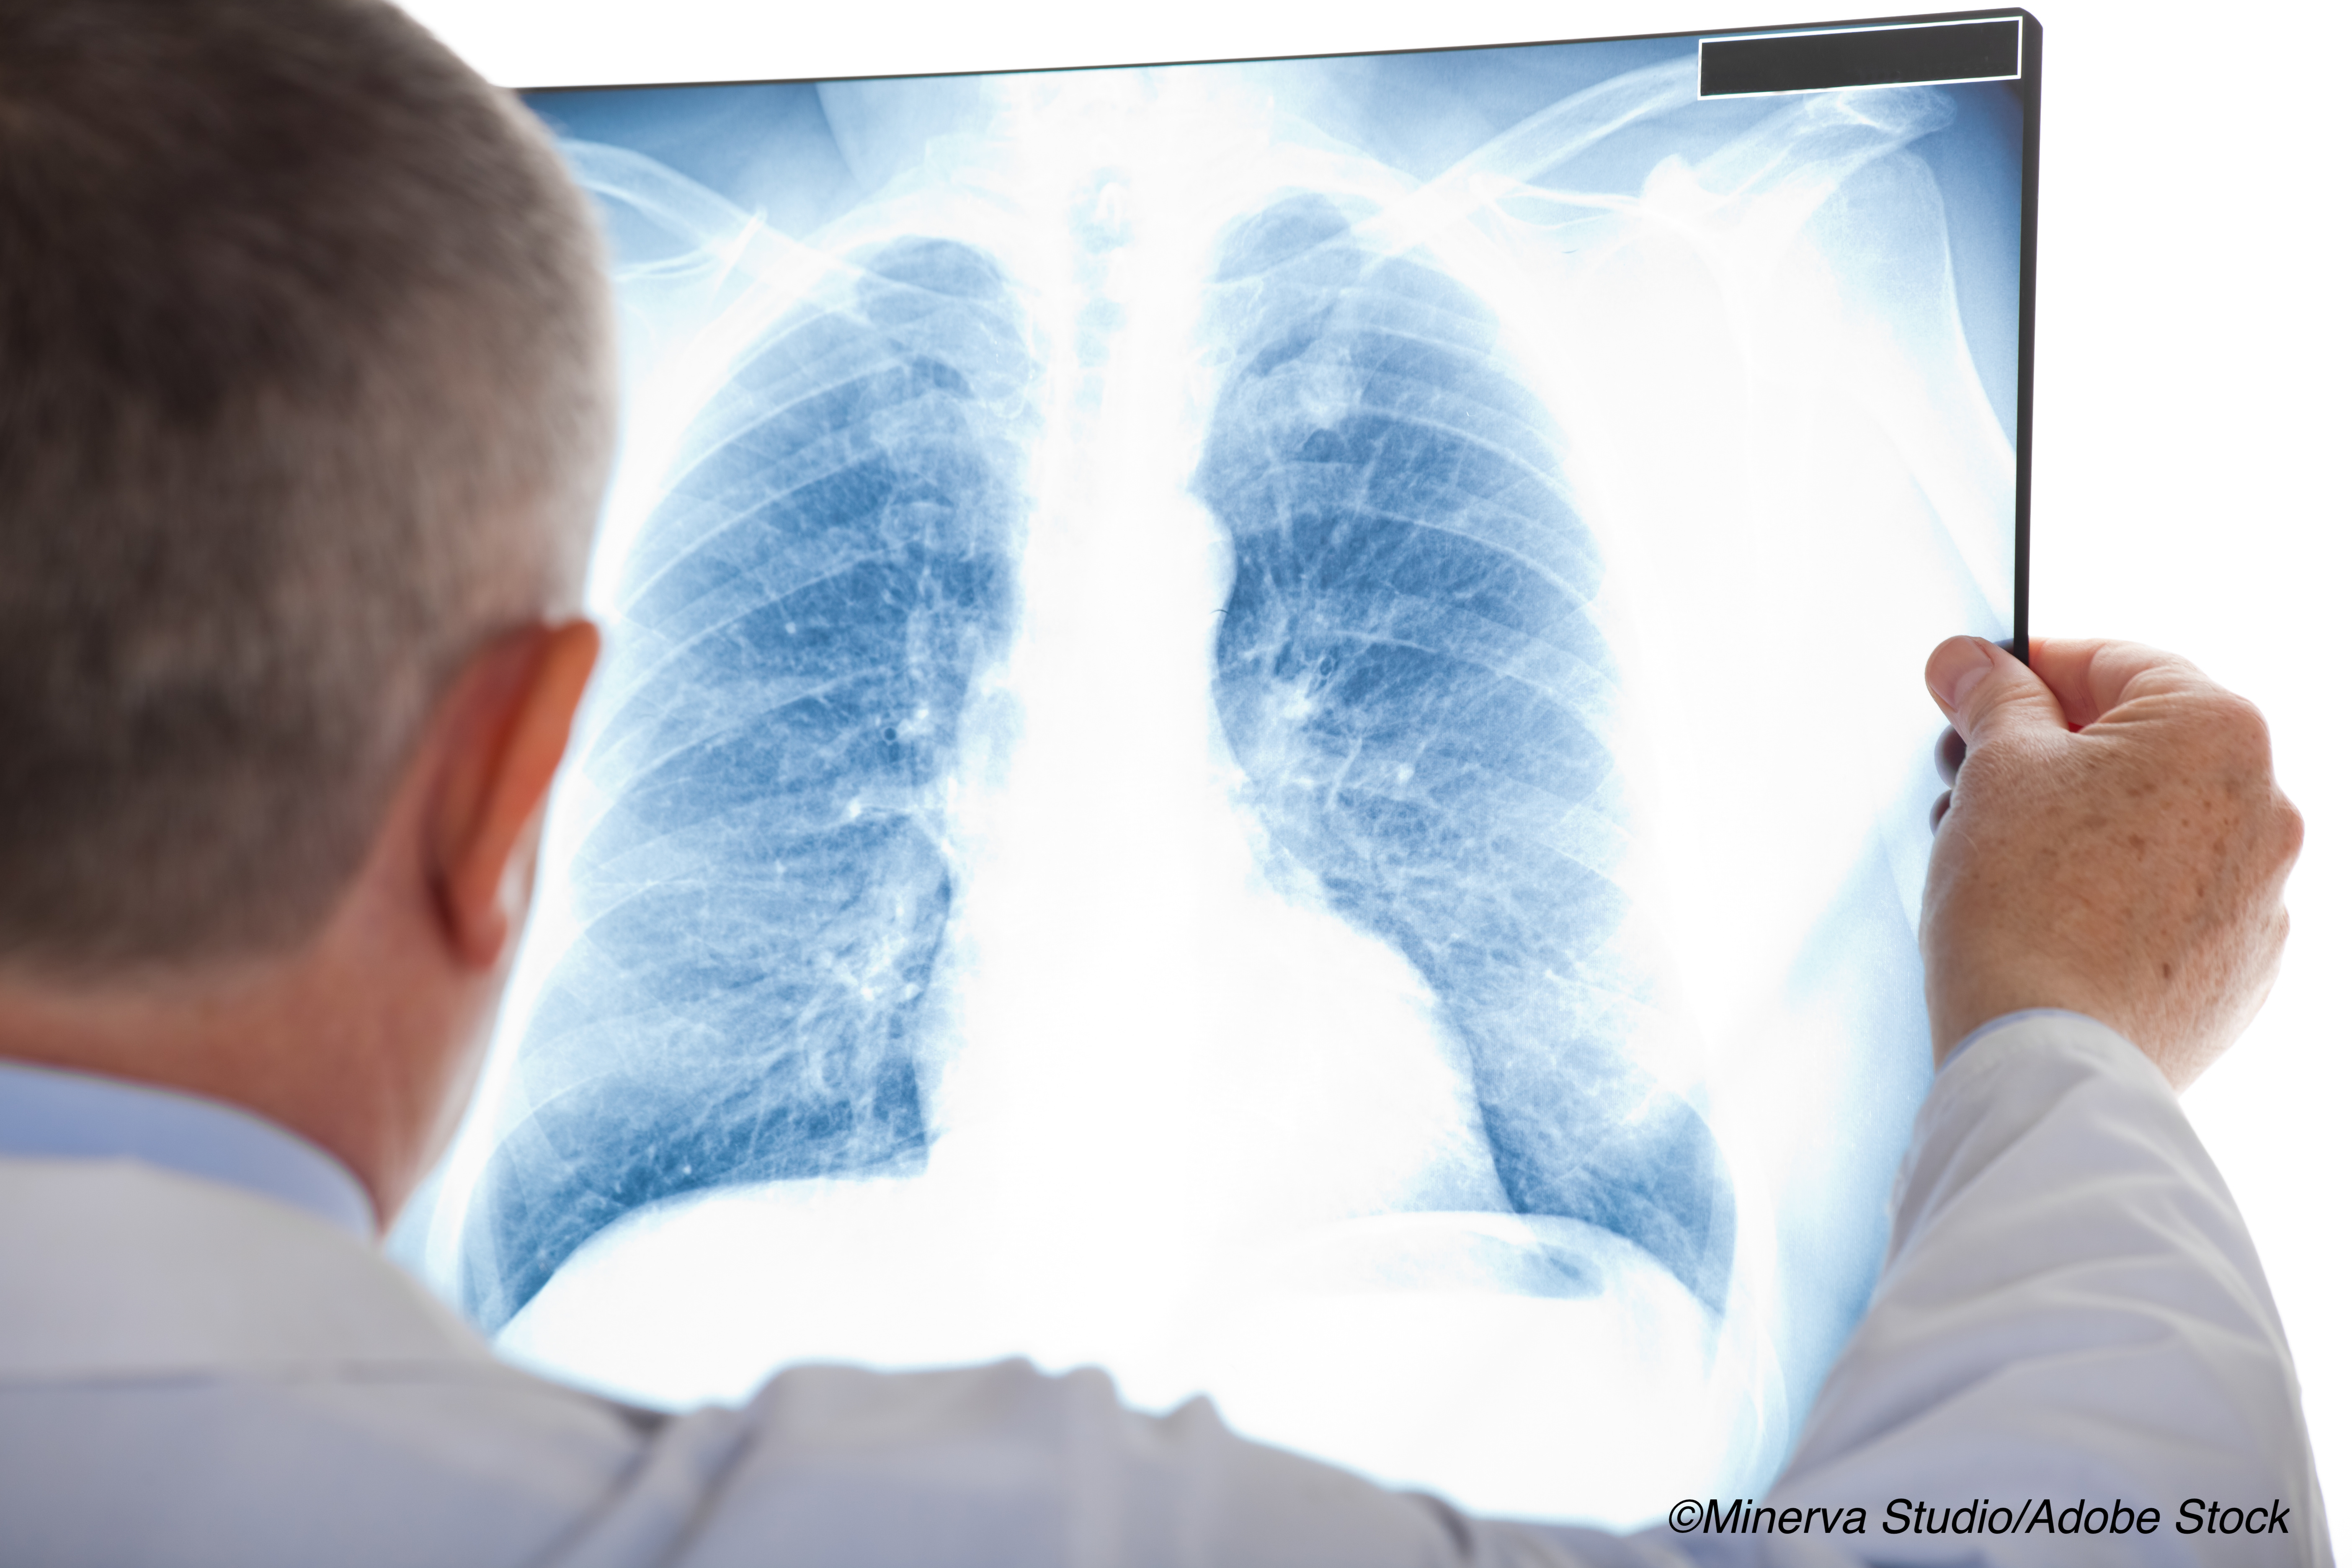 Pembro-Chemo Combo Holds Promise for Stage III NSCLC